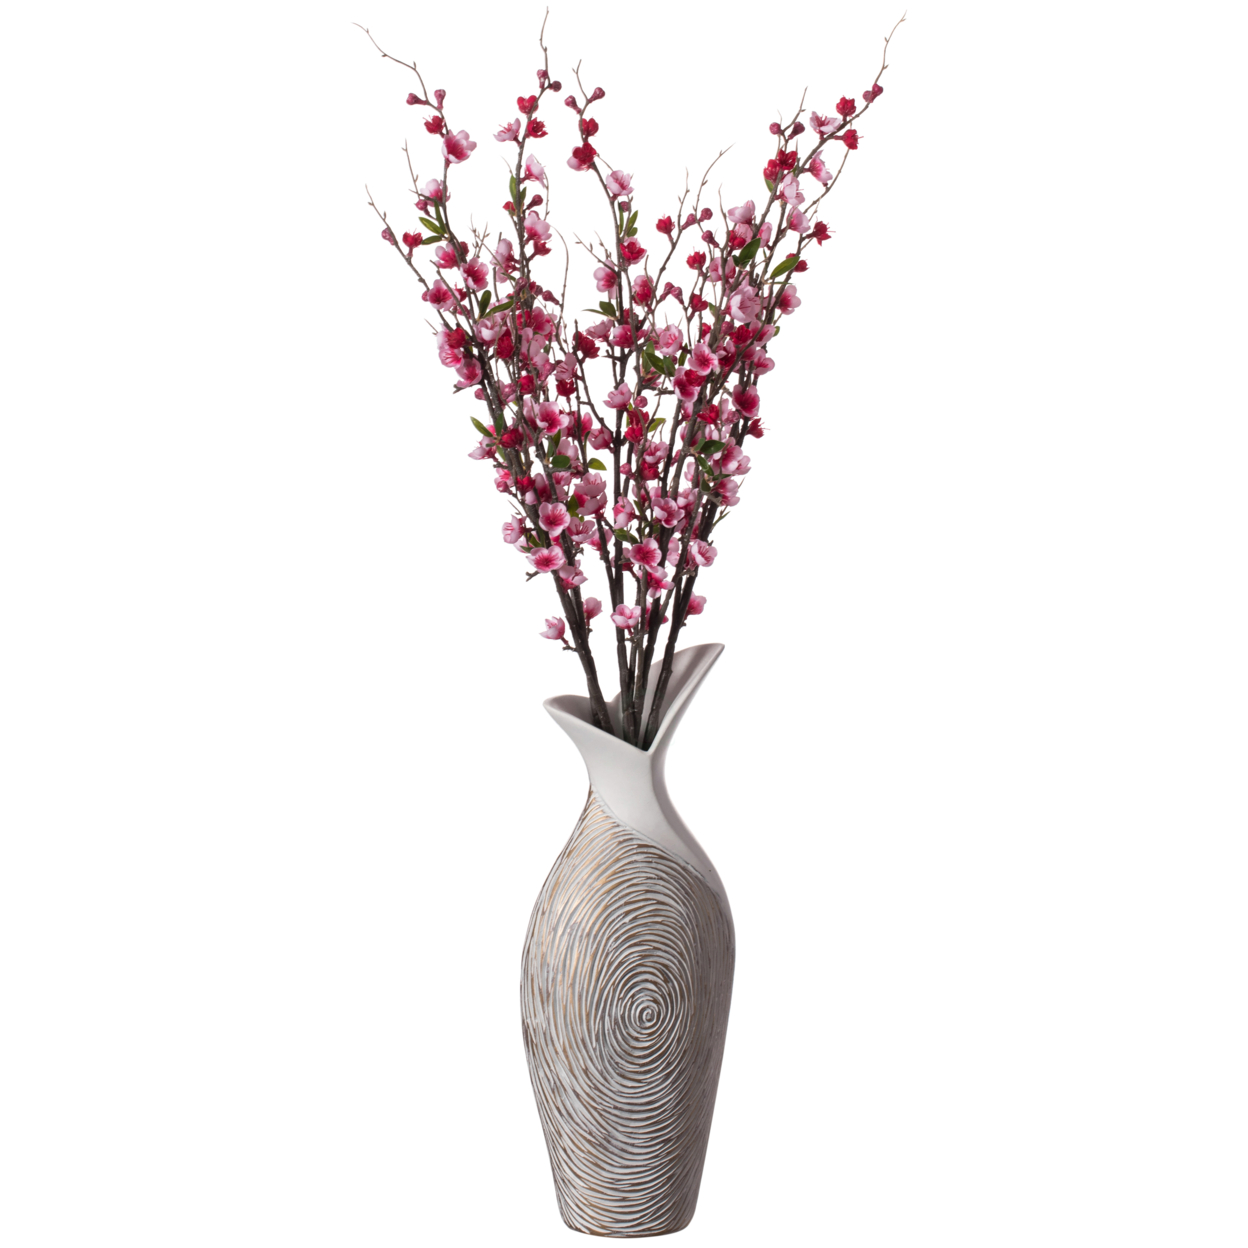 Peach Artificial Cherry Blossom Branch Stem For Home Decoration And Wedding Craft - Red